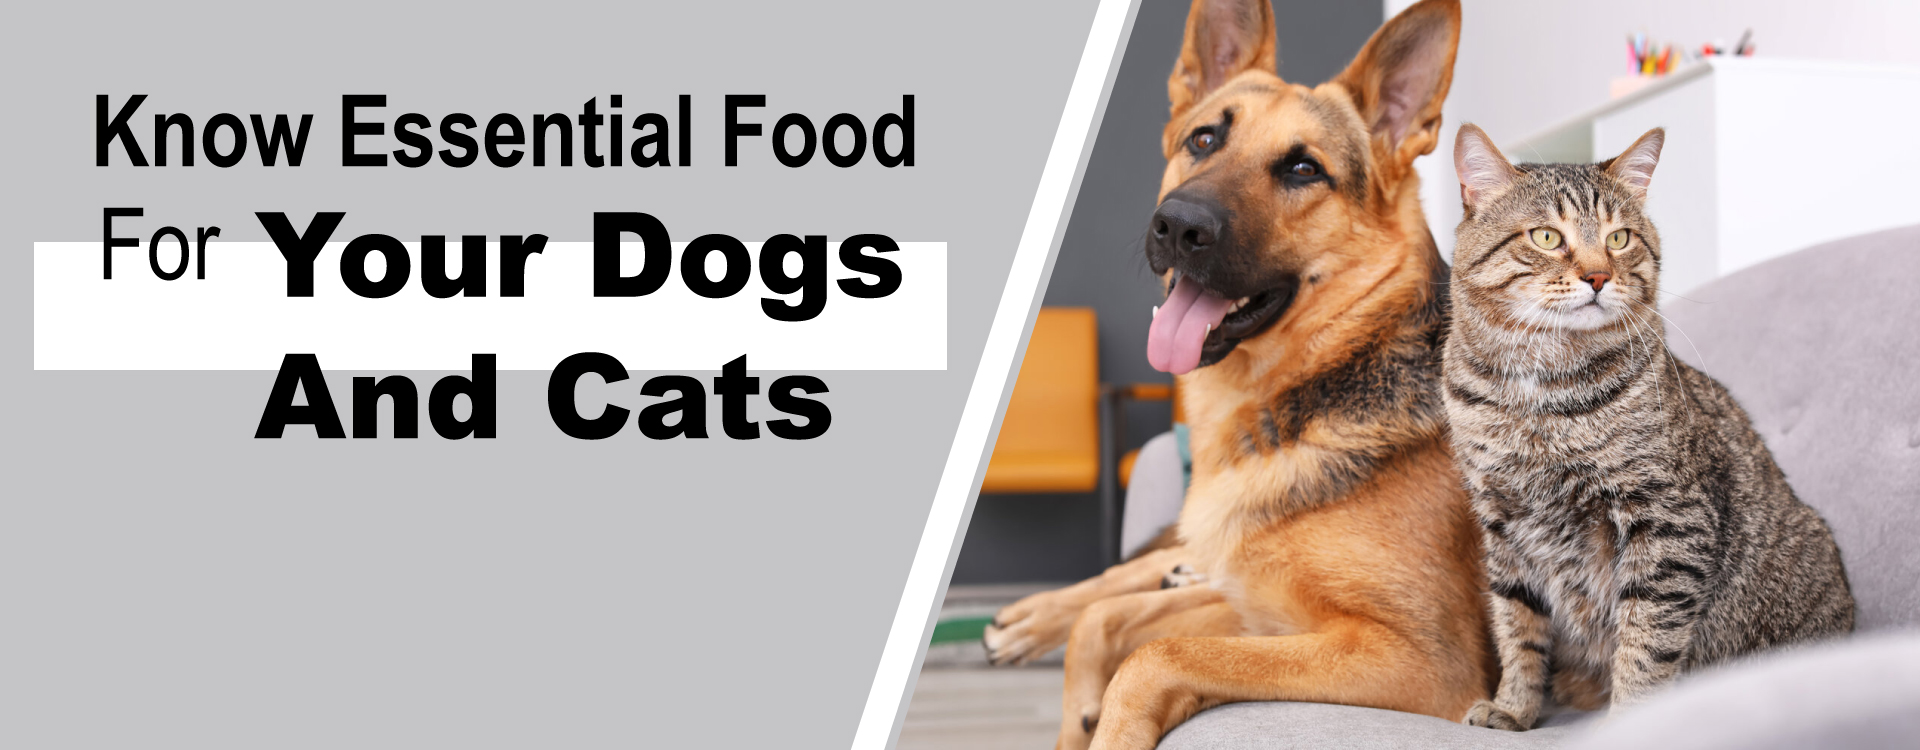 Know-Essential-Food-For-Your-Dogs-and-Cats